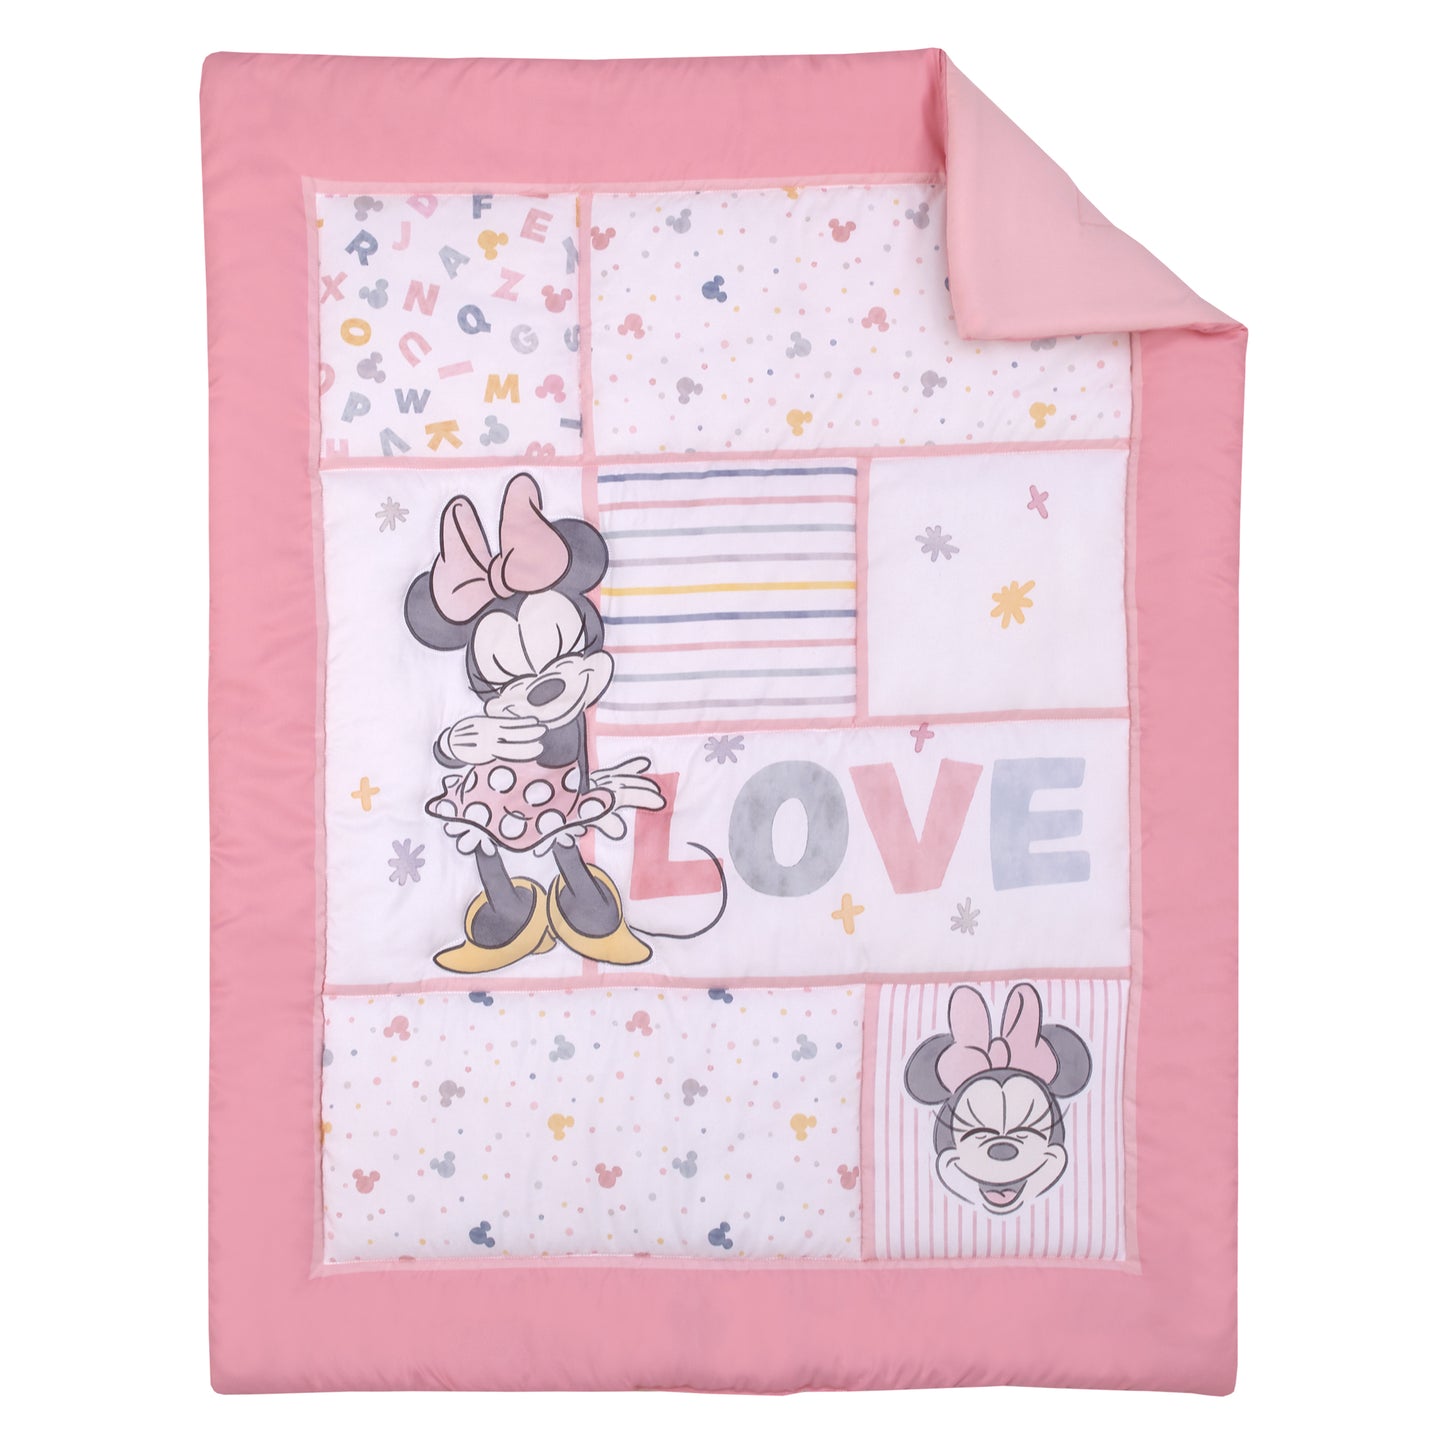 Disney Minnie Mouse Lovely Little Lady Pink and White Stripes and Dots 3 Piece Nursery Crib Bedding Set - Comforter, Fitted Crib Sheet and Crib Skirt